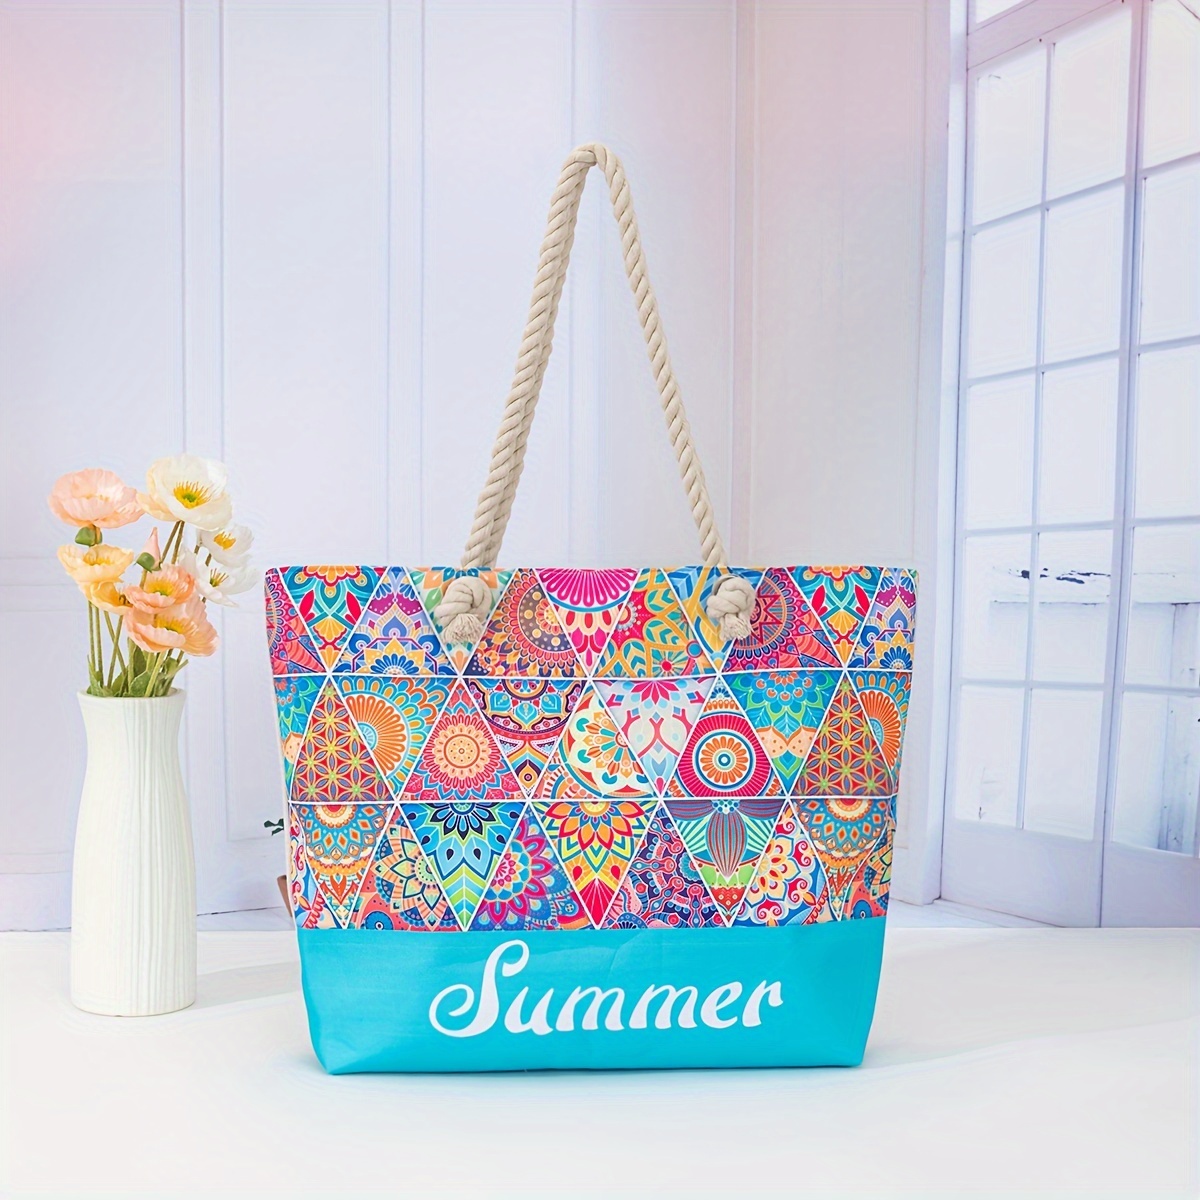 

Summer Printed Casual Style Canvas Material Tote Bag With Rope Handles, Large Capacity Shoulder Bag For Beach, Travel & Vacation